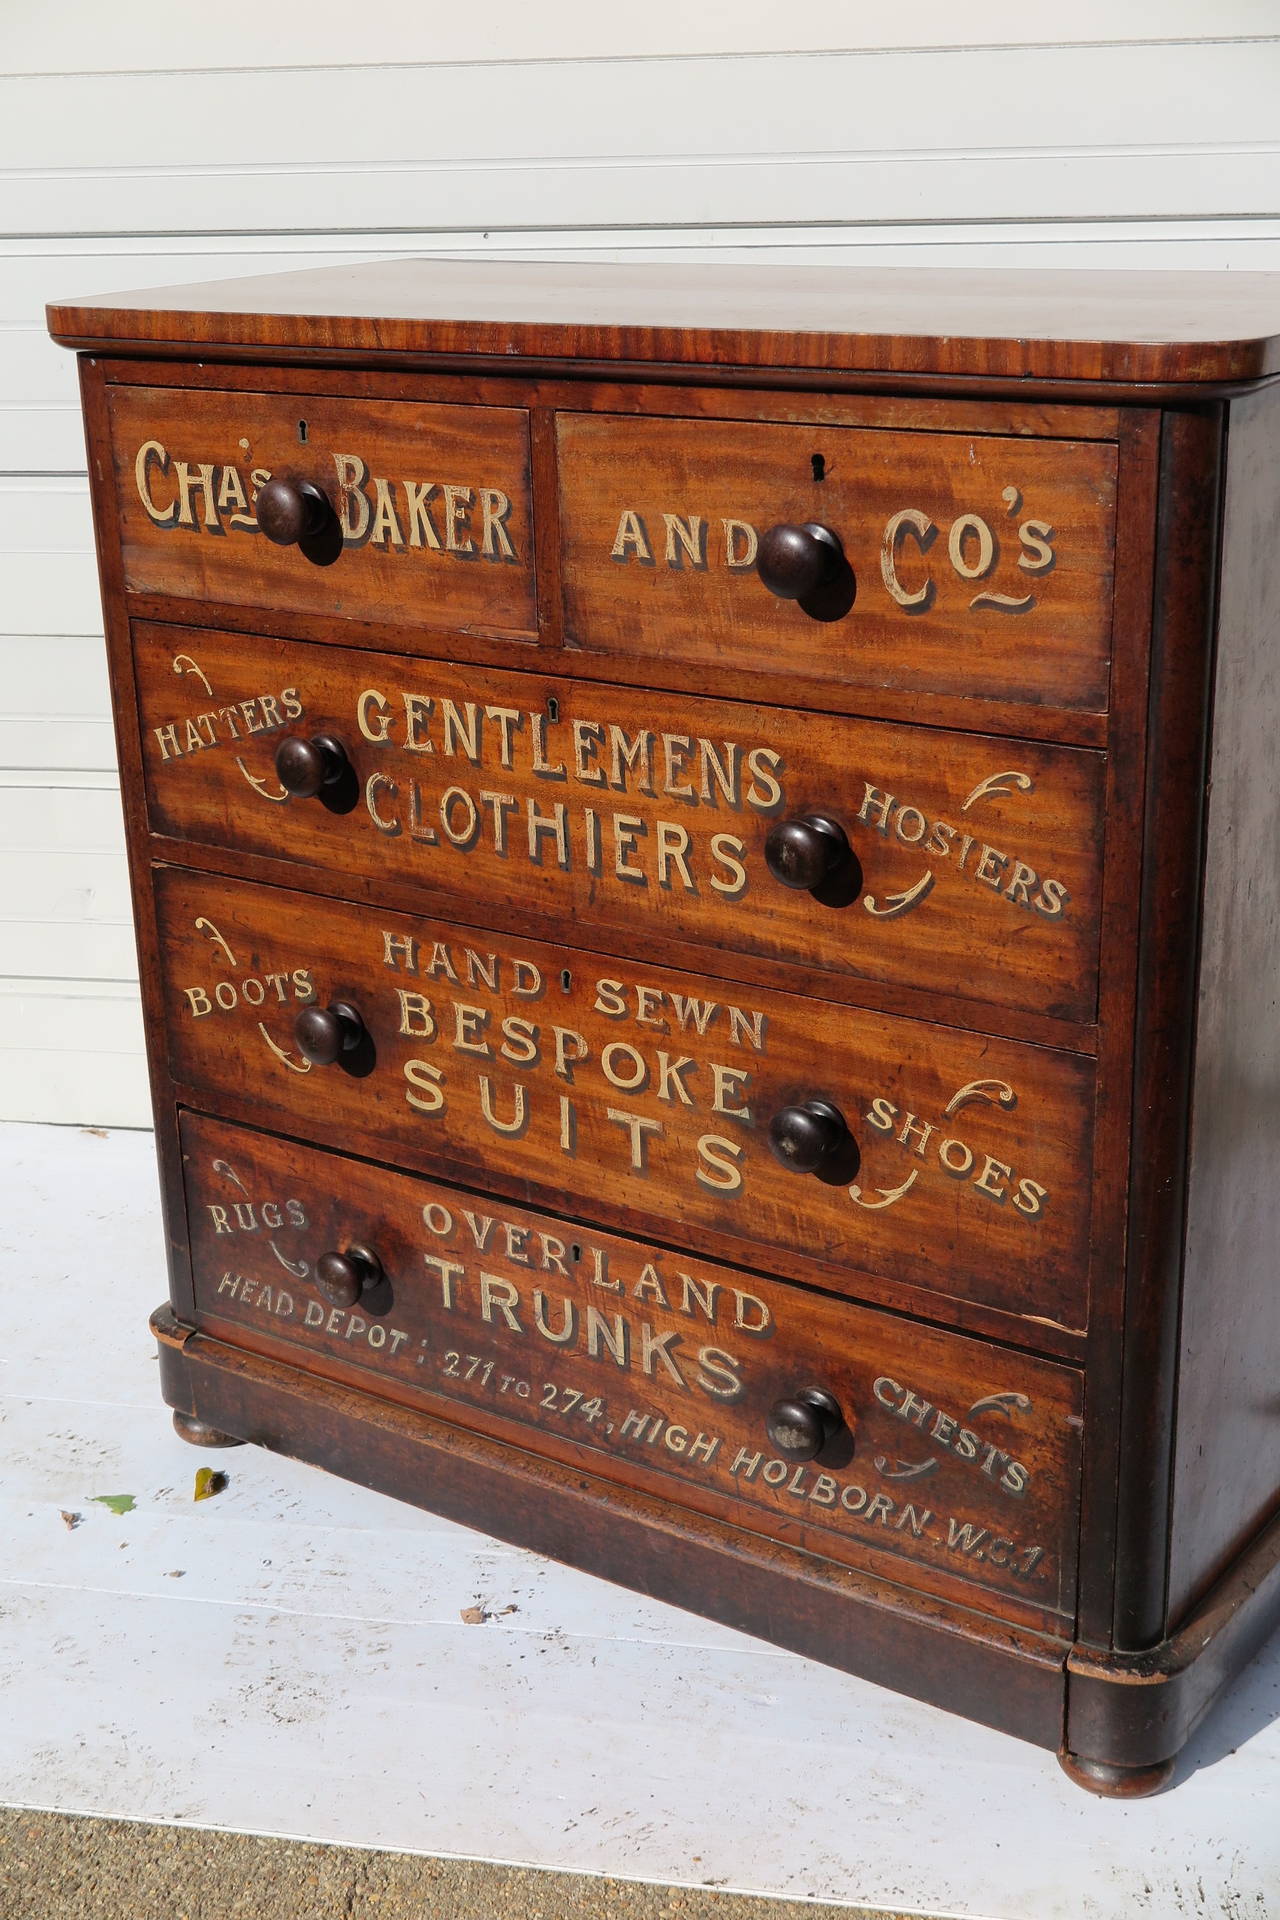 Large English dresser, circa 1900, with later painted advertising for Chas. Baker & Co. Gentlemen Clothiers of London. Five drawers, bun feet, original wooden handles. Others available.